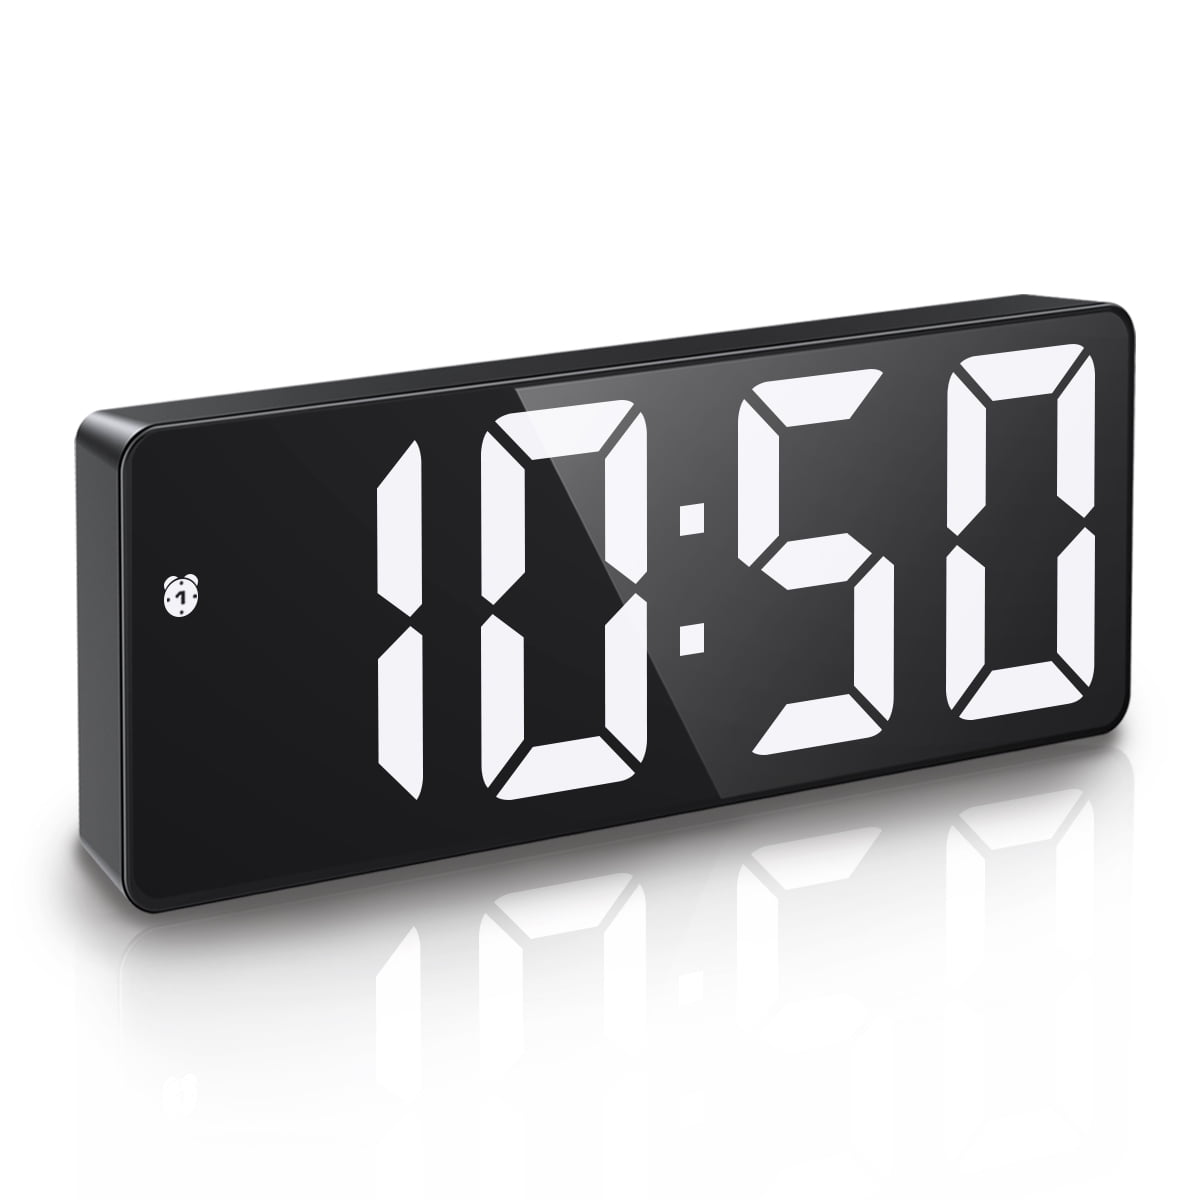 ORIA Electronic Digital Alarm 6.5inch Large LED Clock for Bedside Table Battery Clock with Temperature Display Adjustable Brightness Voice Control for Home, White - Walmart.com